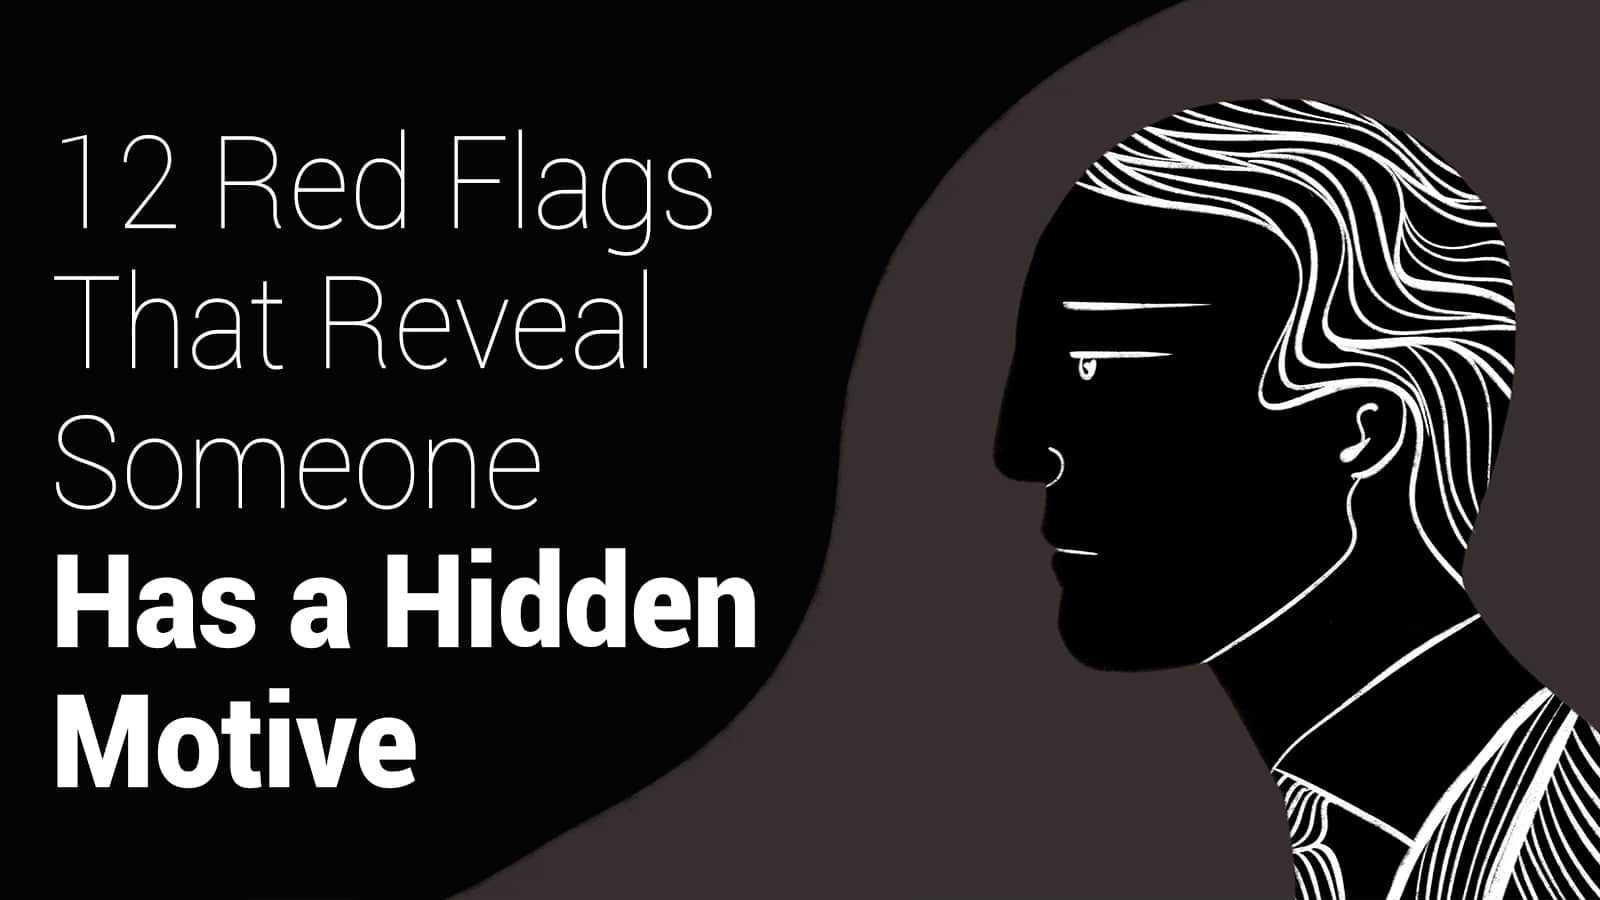 12 Red Flags That Reveal Someone Has a Hidden Motive